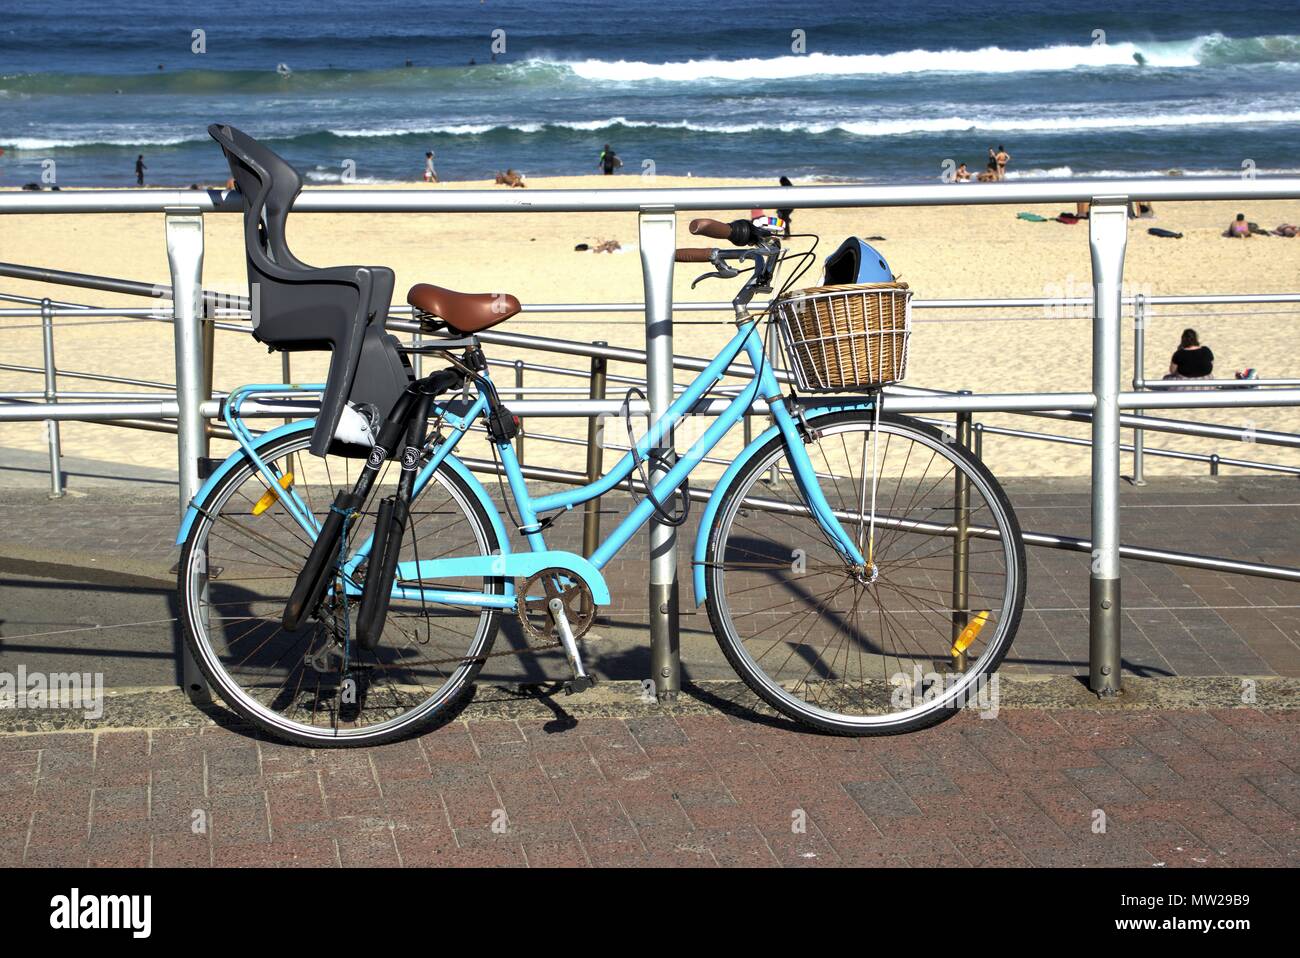 Locked bicycle parked at Bondi beach Sydney Australia. Bicycle with baby seat fitted on it outdoors. Stock Photo